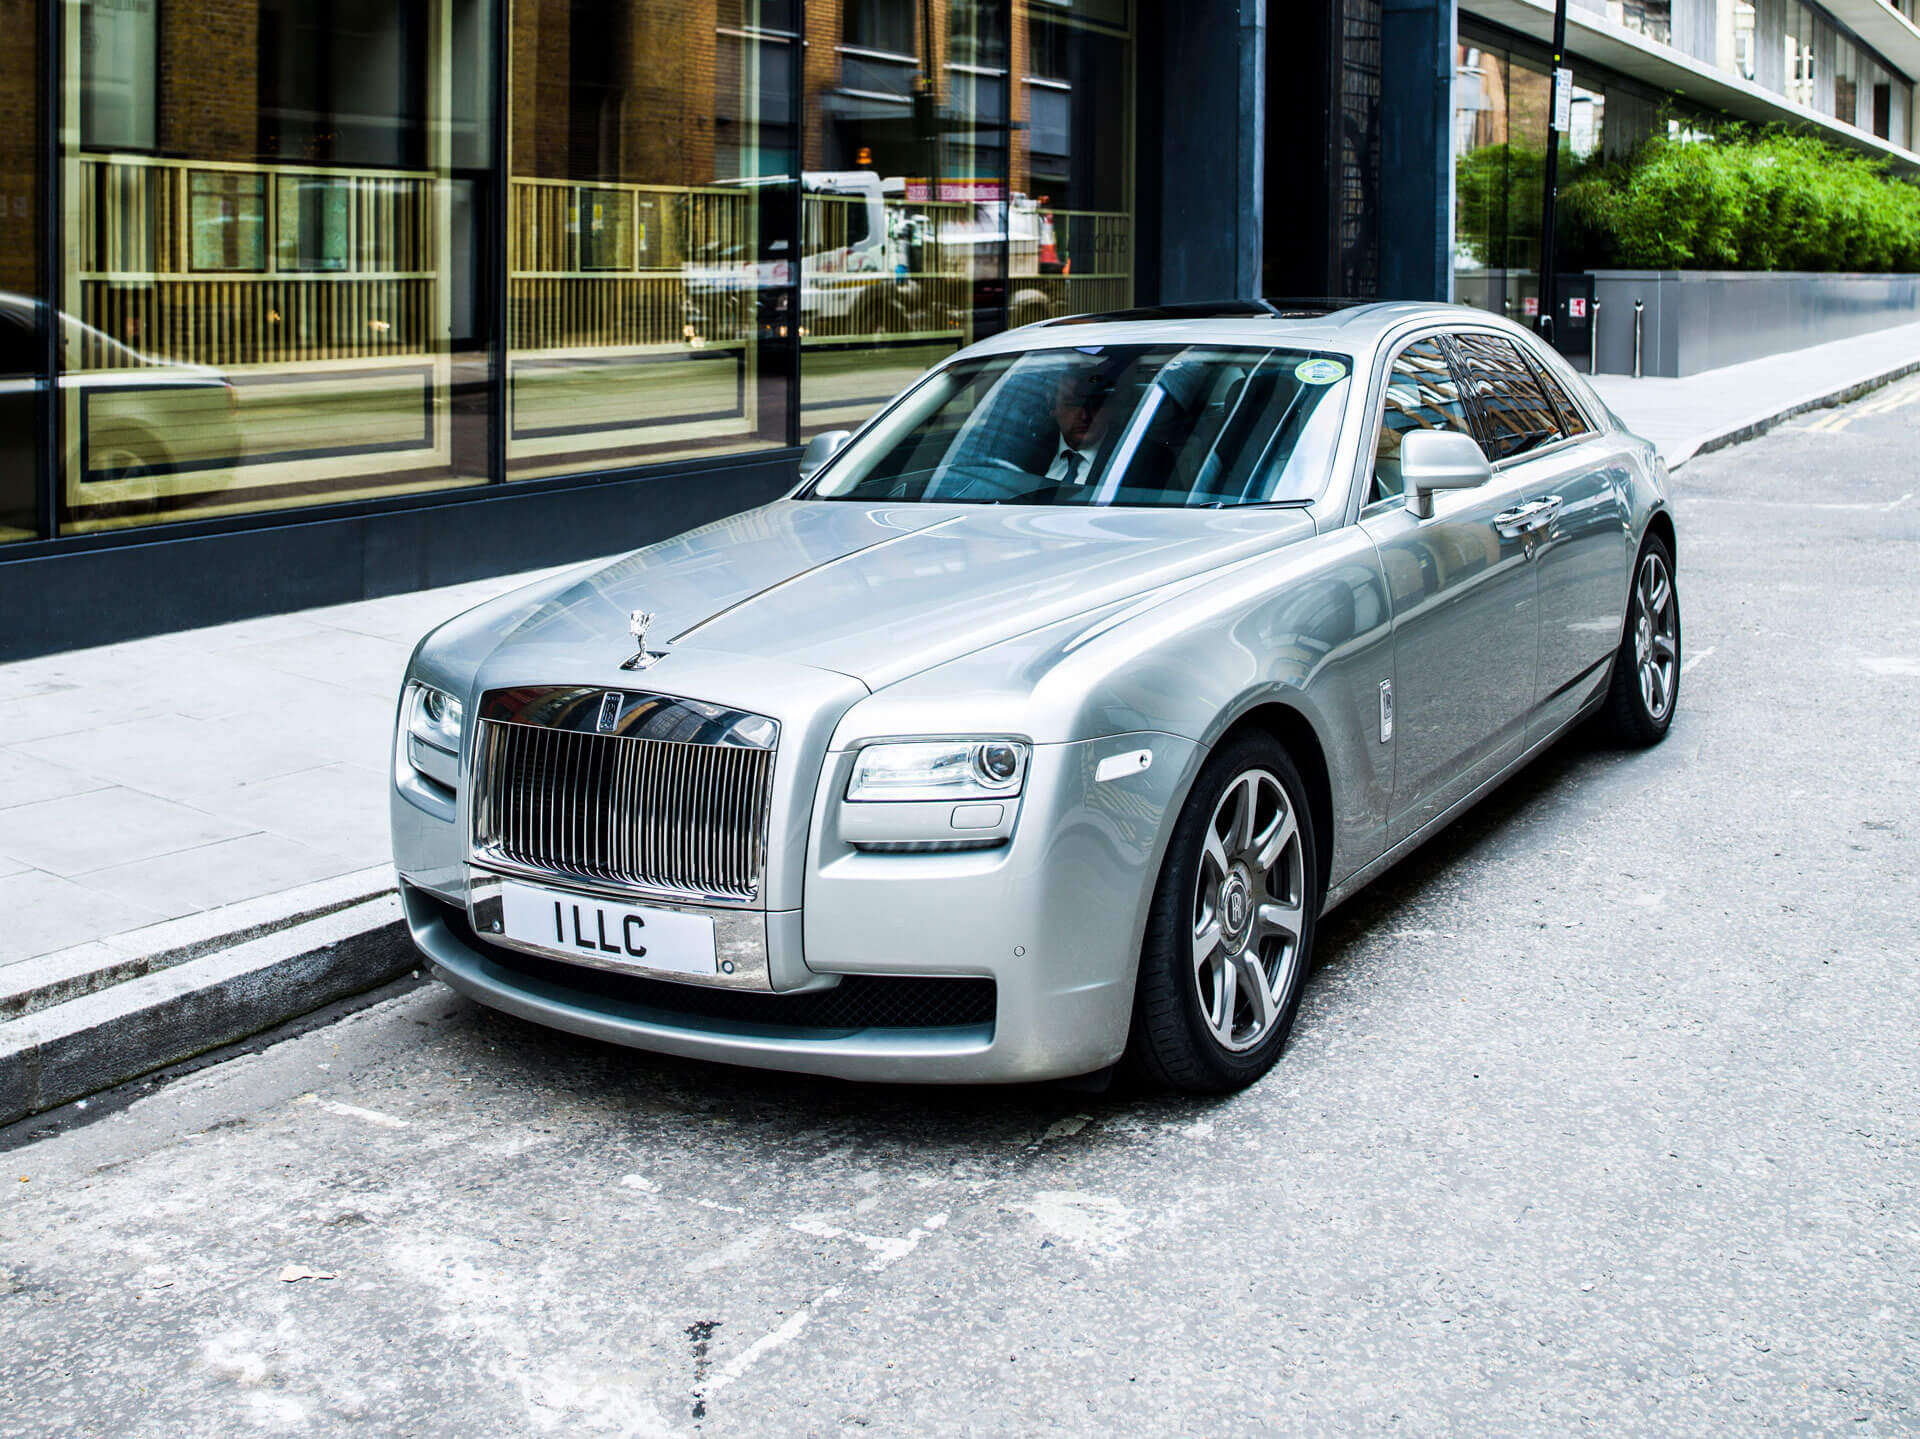 Chauffeur Hire with London Luxury Chauffeuring for Bar and Bat Mitzvah’s in London